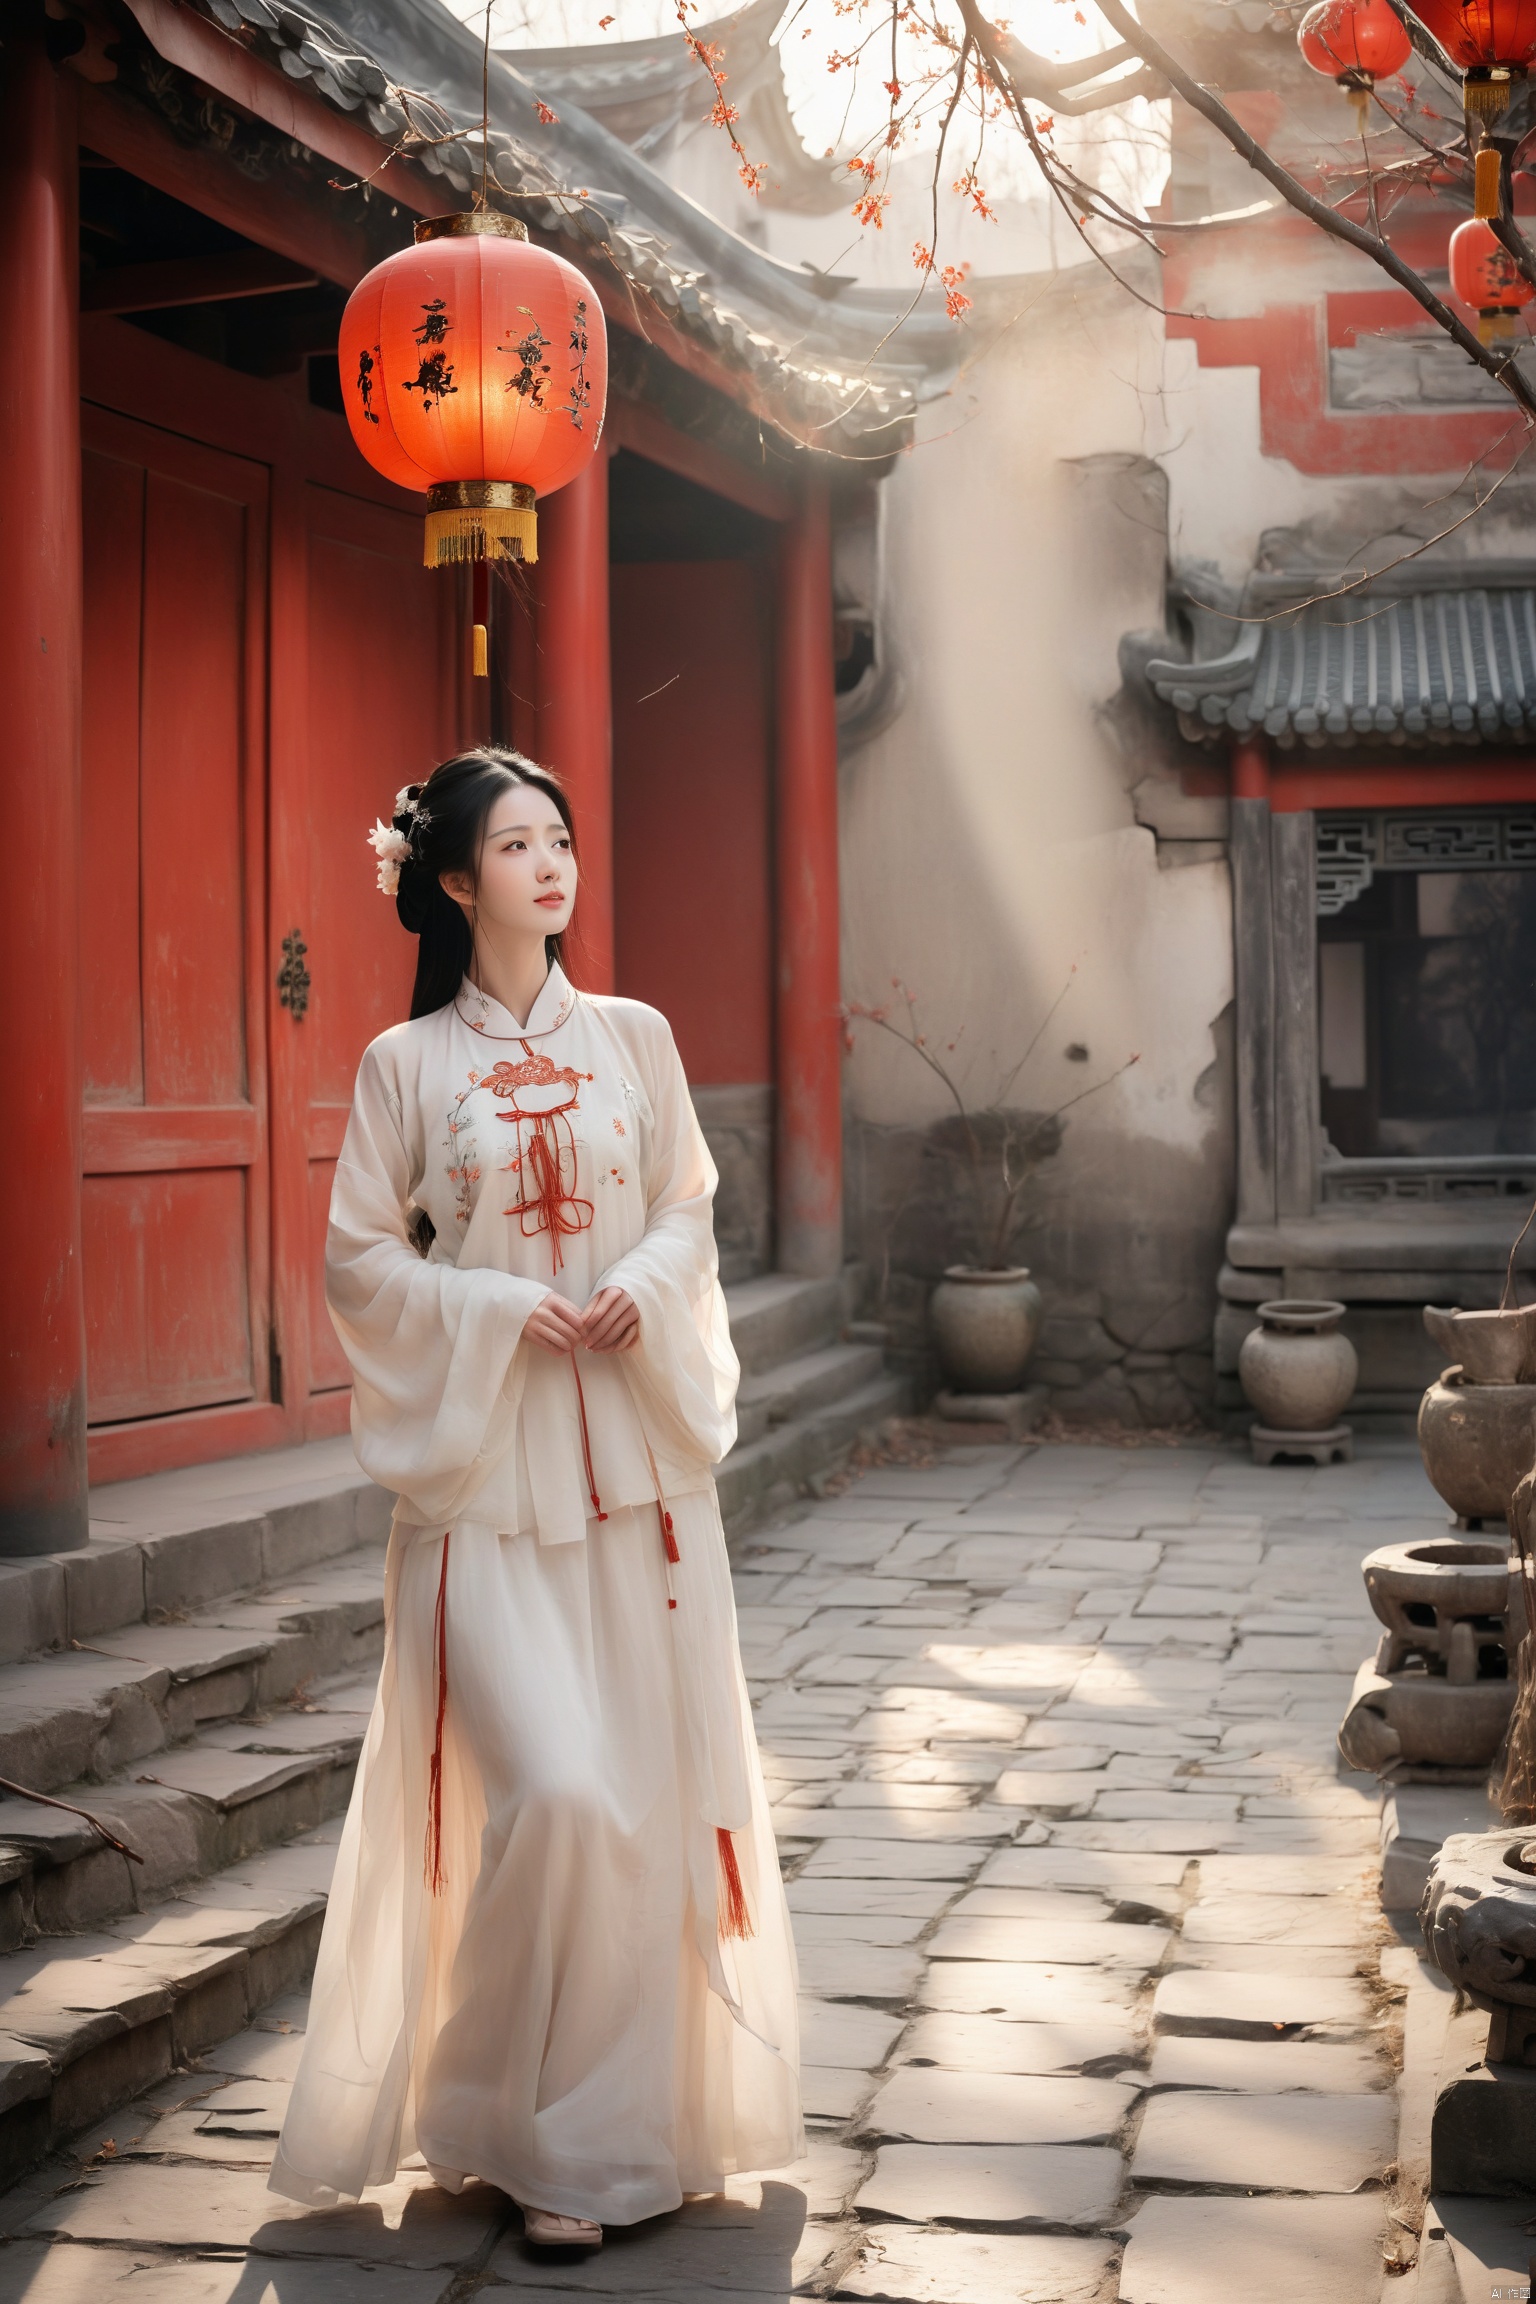 A graceful woman dressed in traditional Chinese white hanfu, standing elegantly on ancient stone steps. Her long black hair is styled in a simple, flowing manner, fluttering in the wind. She is holding the hem of her dress delicately, lifting it slightly as she gazes upwards with a serene expression. The background features an old, weathered building with traditional Chinese architecture and red lanterns hanging, adding a touch of color to the monochromatic setting,sunlight,falling dust,The scene is set in early spring, with bare branches framing the composition, and soft, natural light illuminating the woman and her surroundings, highlighting the intricate details of her attire. The overall atmosphere is calm and nostalgic, capturing a moment of quiet beauty, best quality, ultra highres, original, extremely detailed, perfect lighting